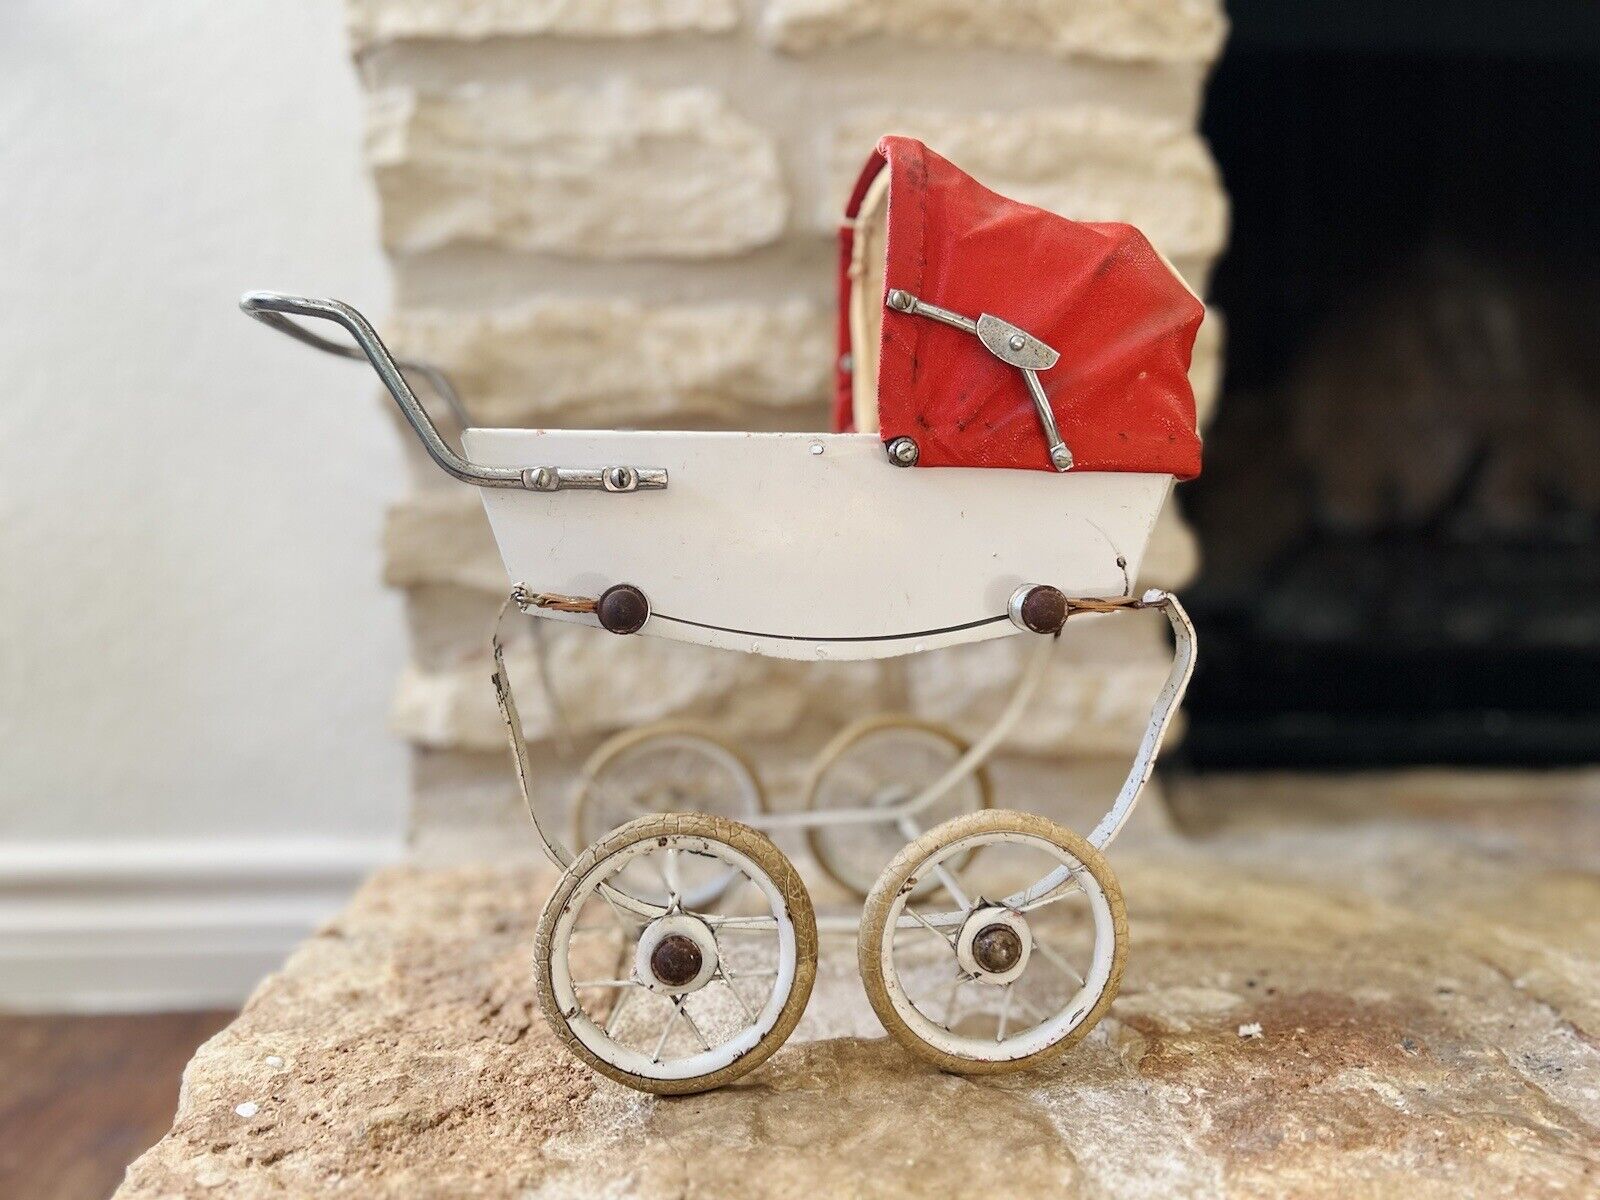 Vintage Mid-Century French Doll Pram/Stroller Buggy Carriage Red Brand France